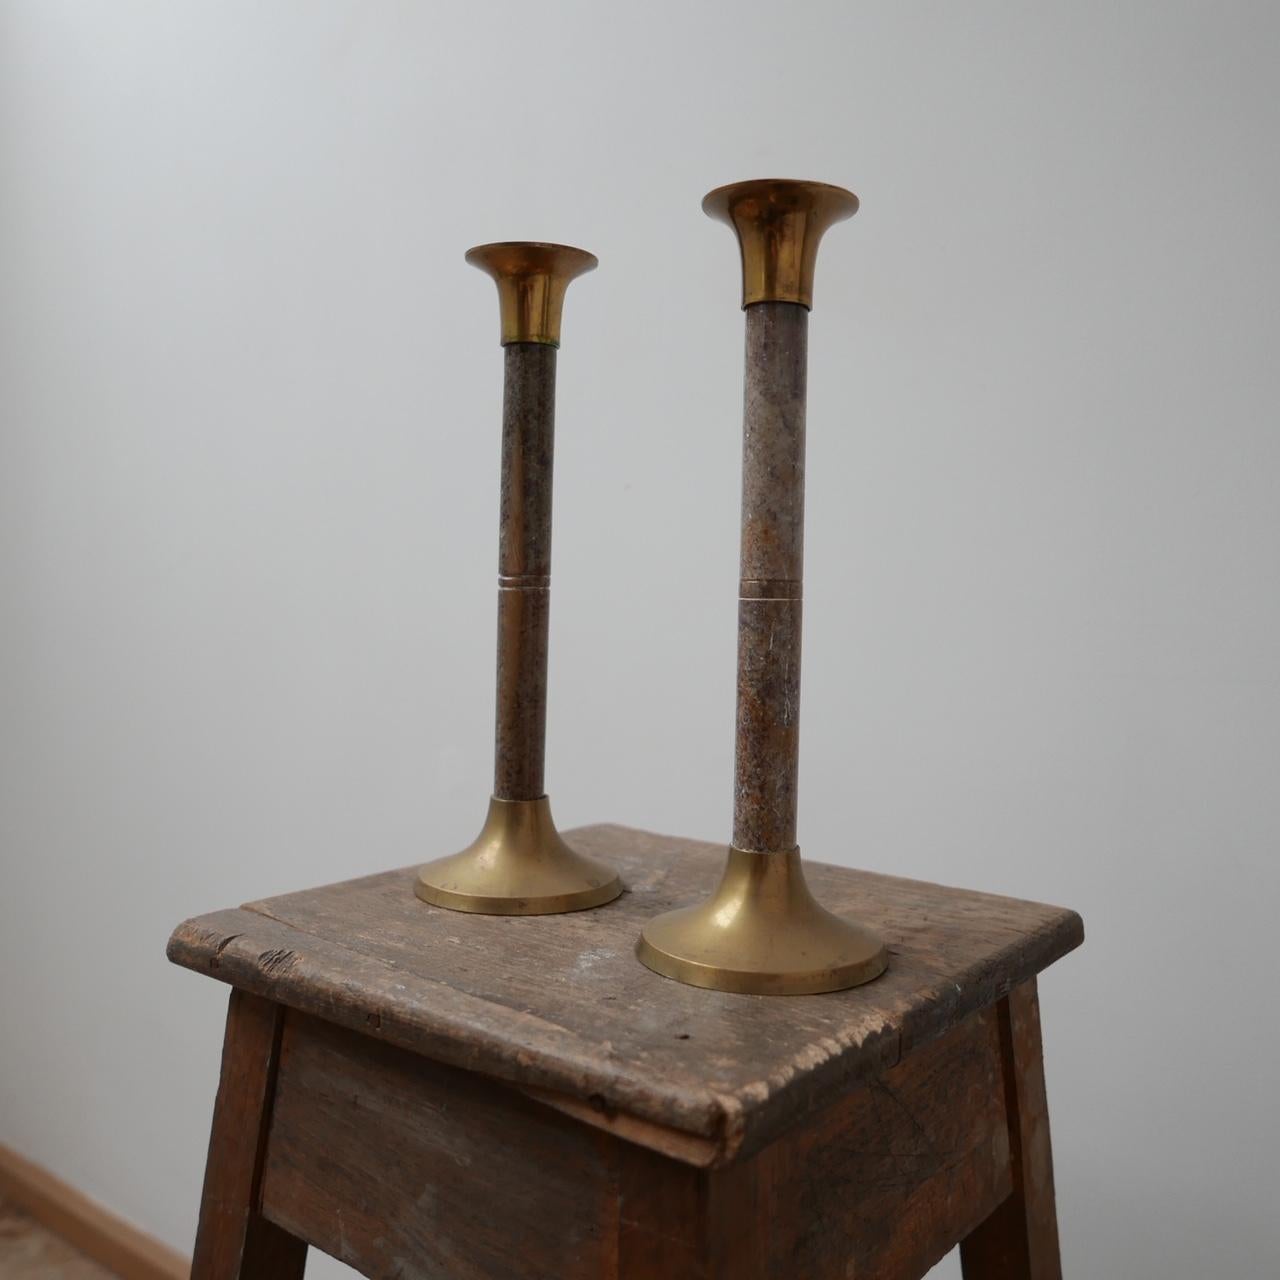 A pair of elegant marble and brass candlesticks.

Midcentury, from Holland.

Simple, functional and timeless.

Dimensions: 30 height x 10 diameter in cm.
 